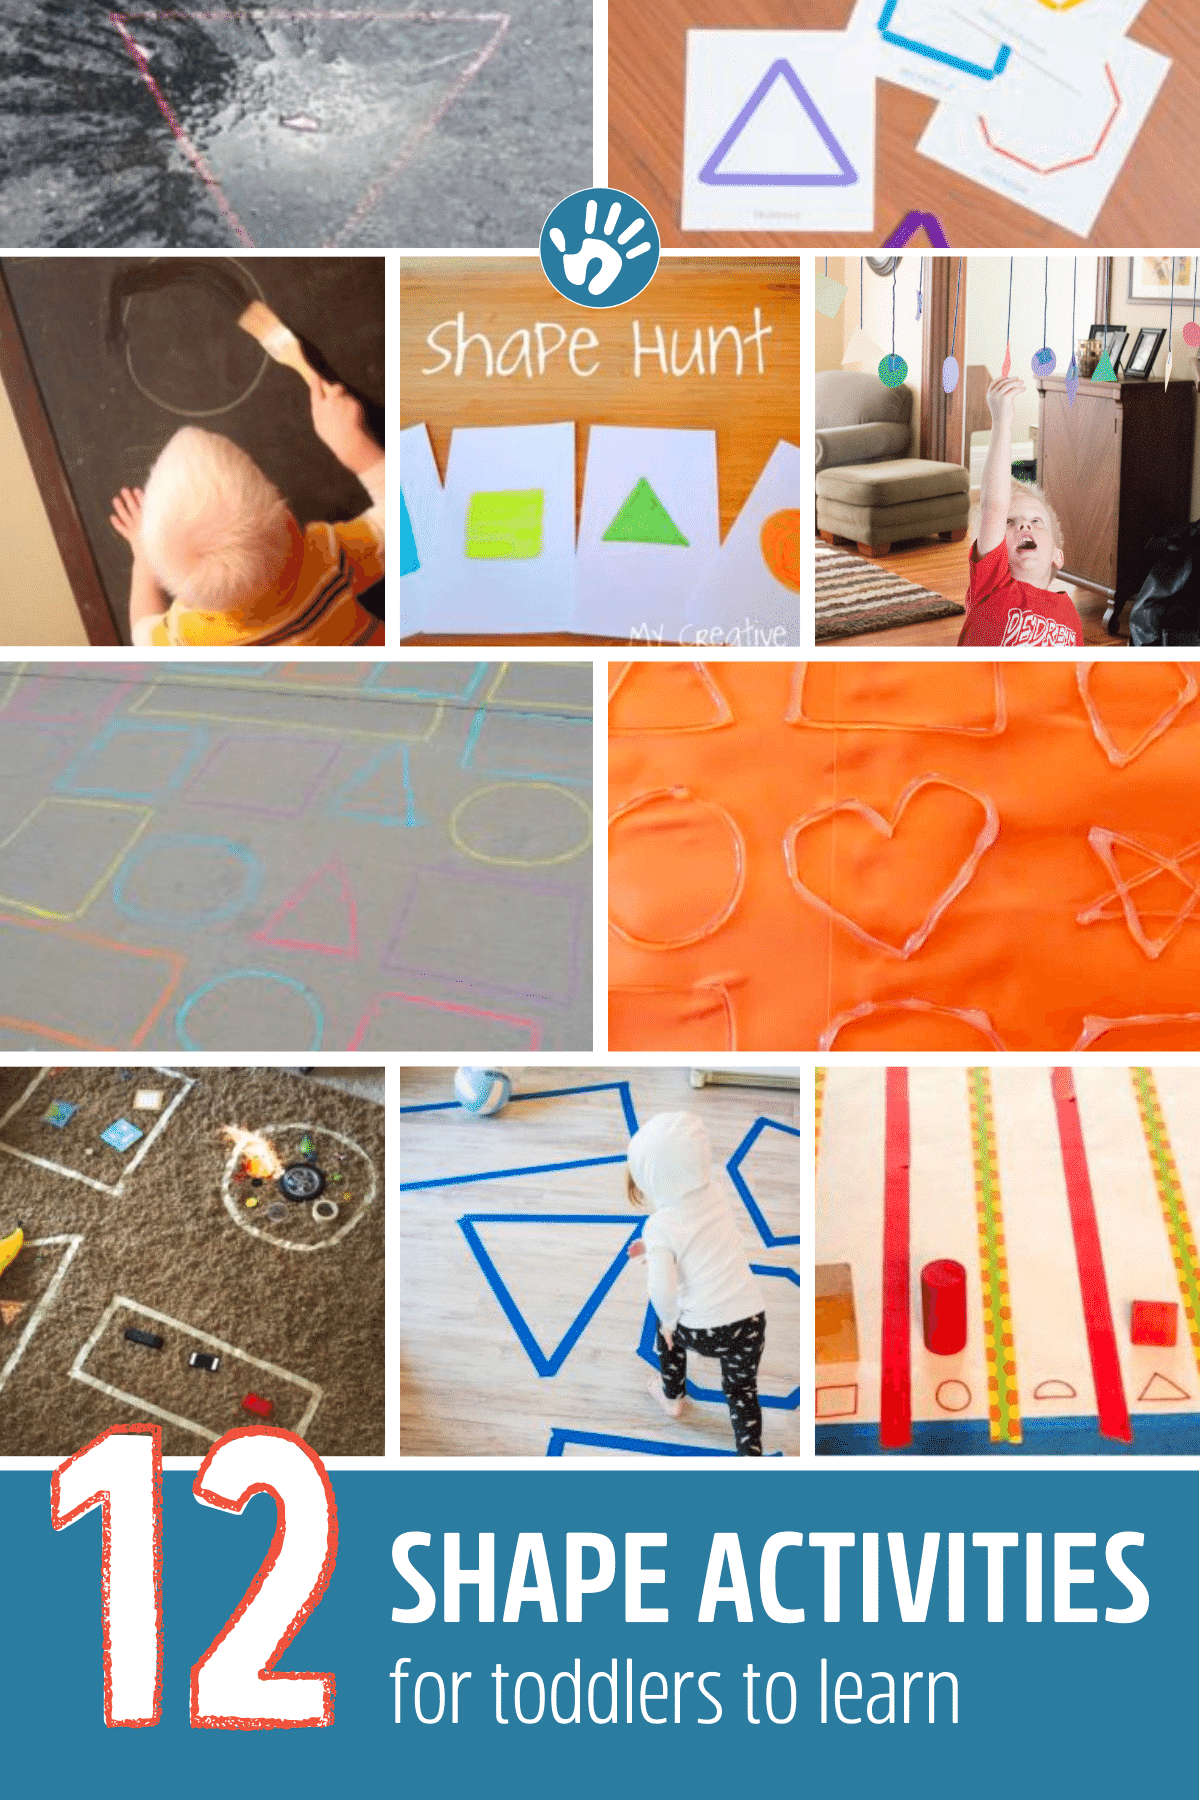 These shape activities for toddlers are all very hands on and fun, the learning is just a plus!